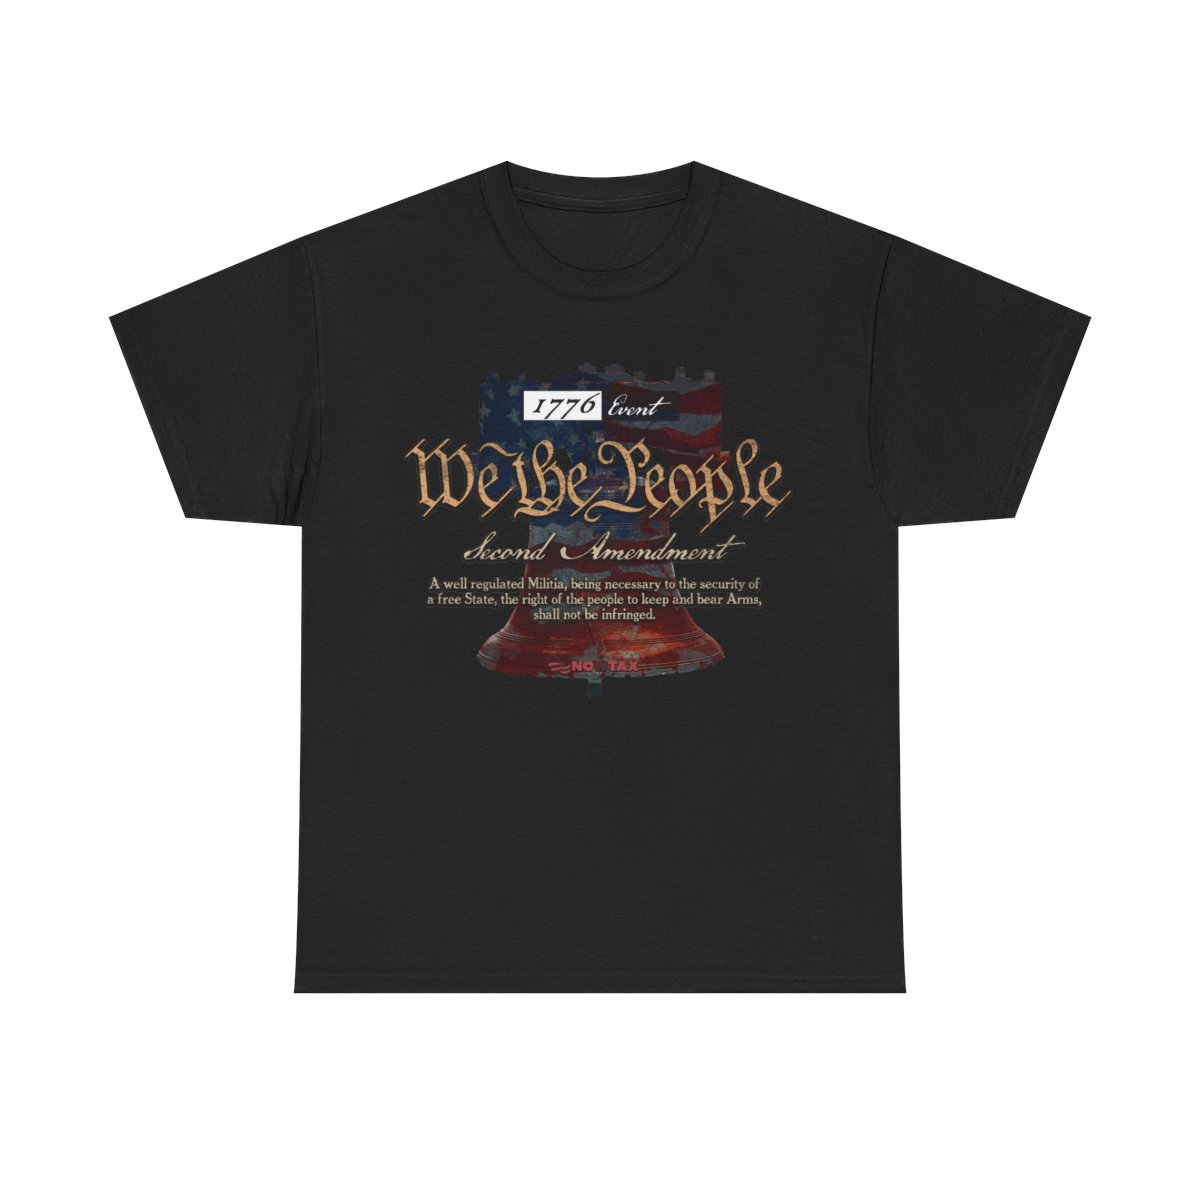 1776 EVENT - WE THE PEOPLE - SECOND AMENDMENT product thumbnail image